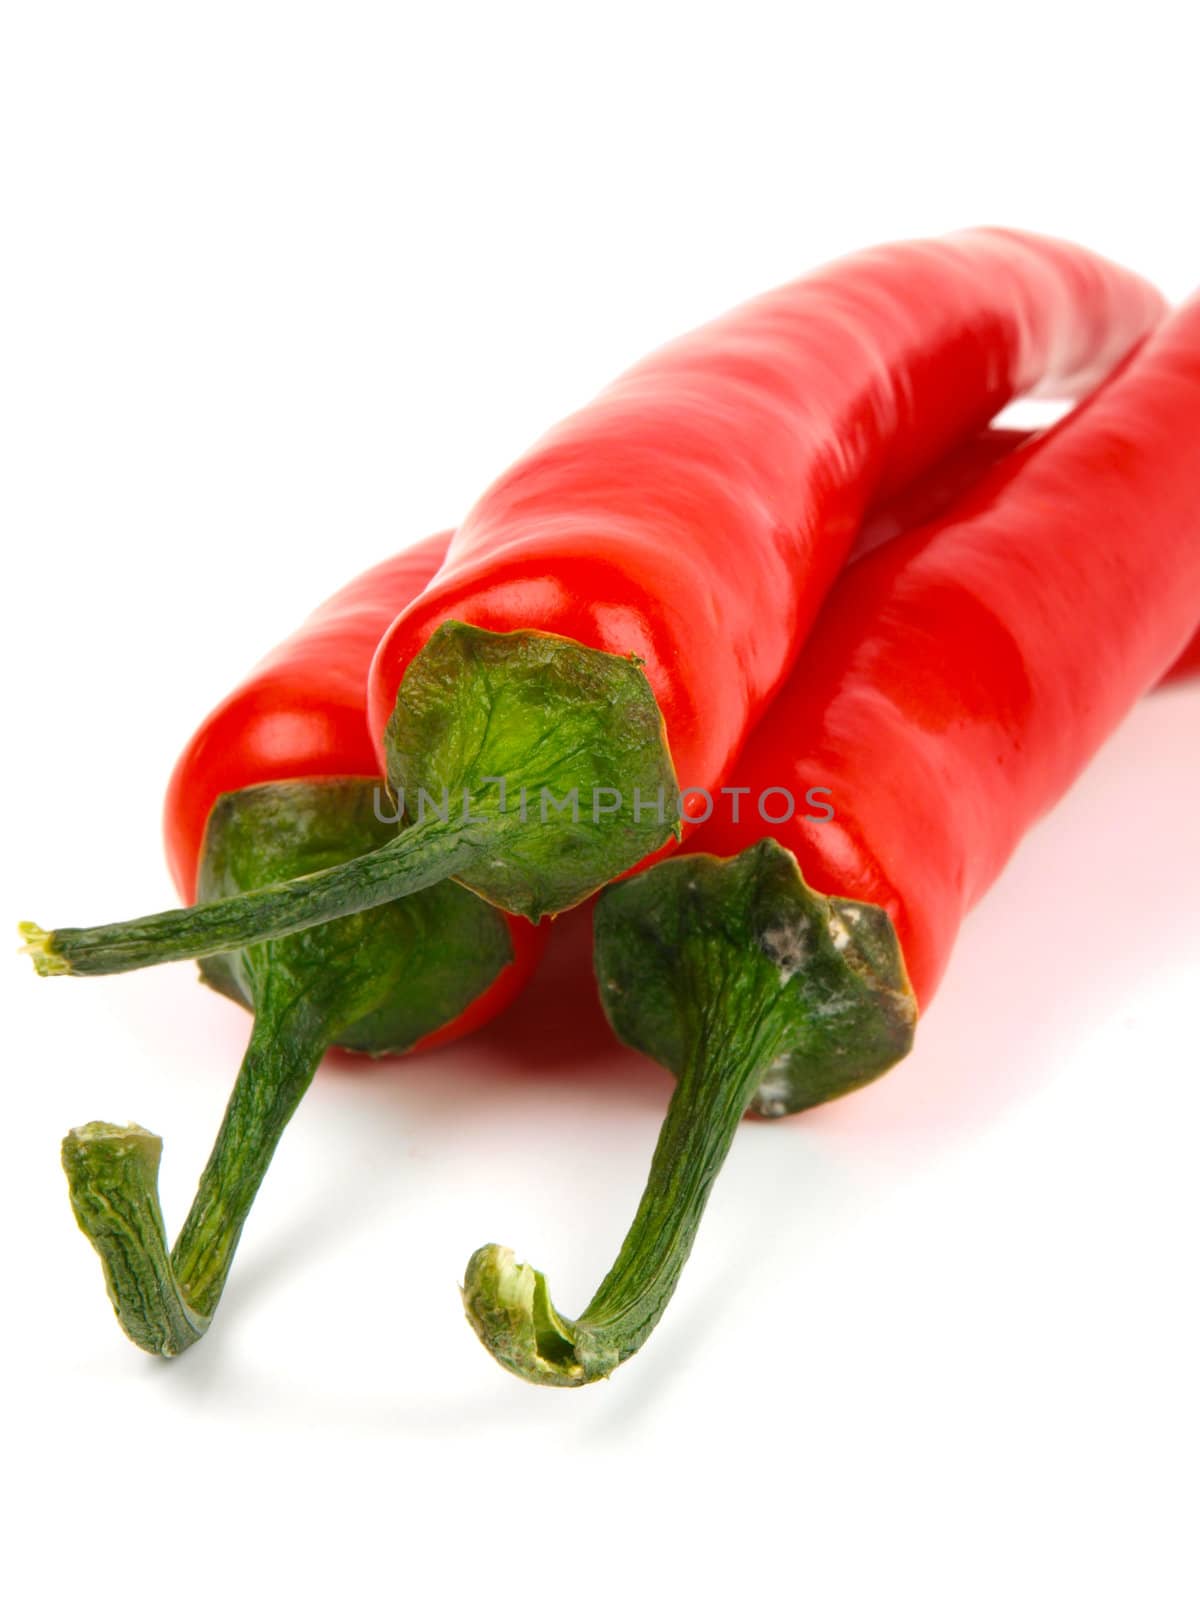 Red chili pepper. Close up. White background by dotweb